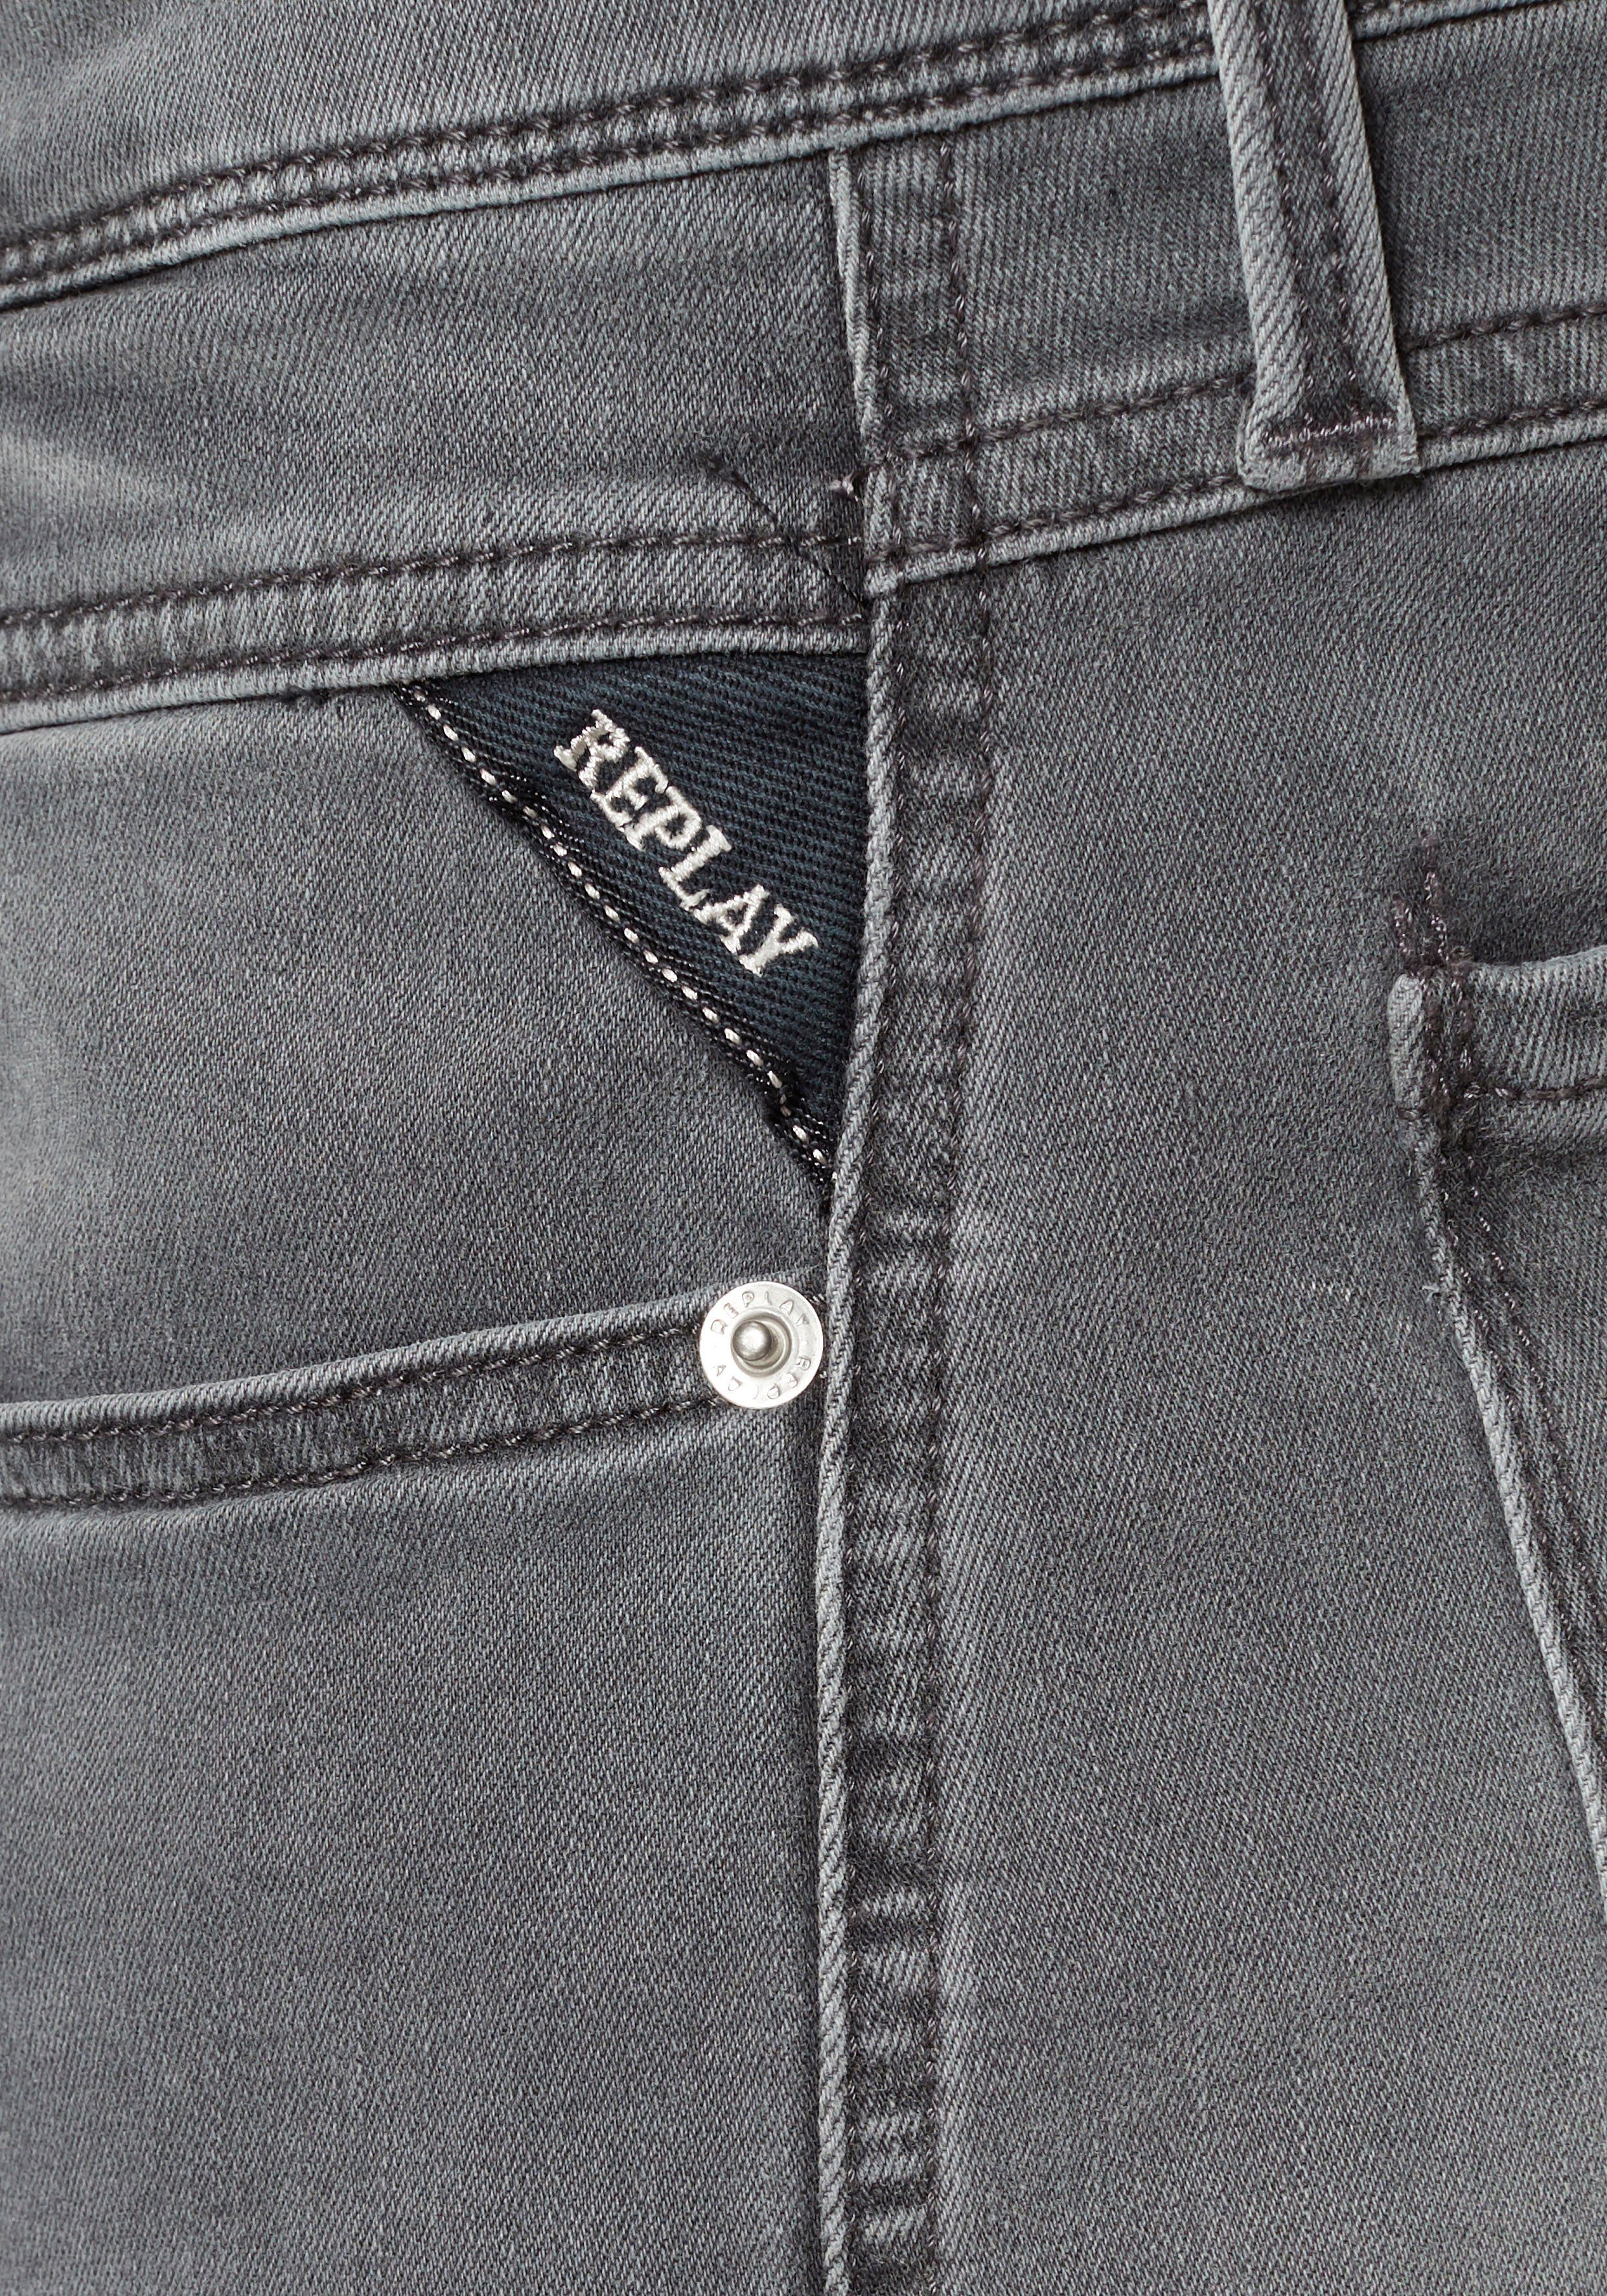 Replay Slim-fit-Jeans Anbass Superstretch GREY